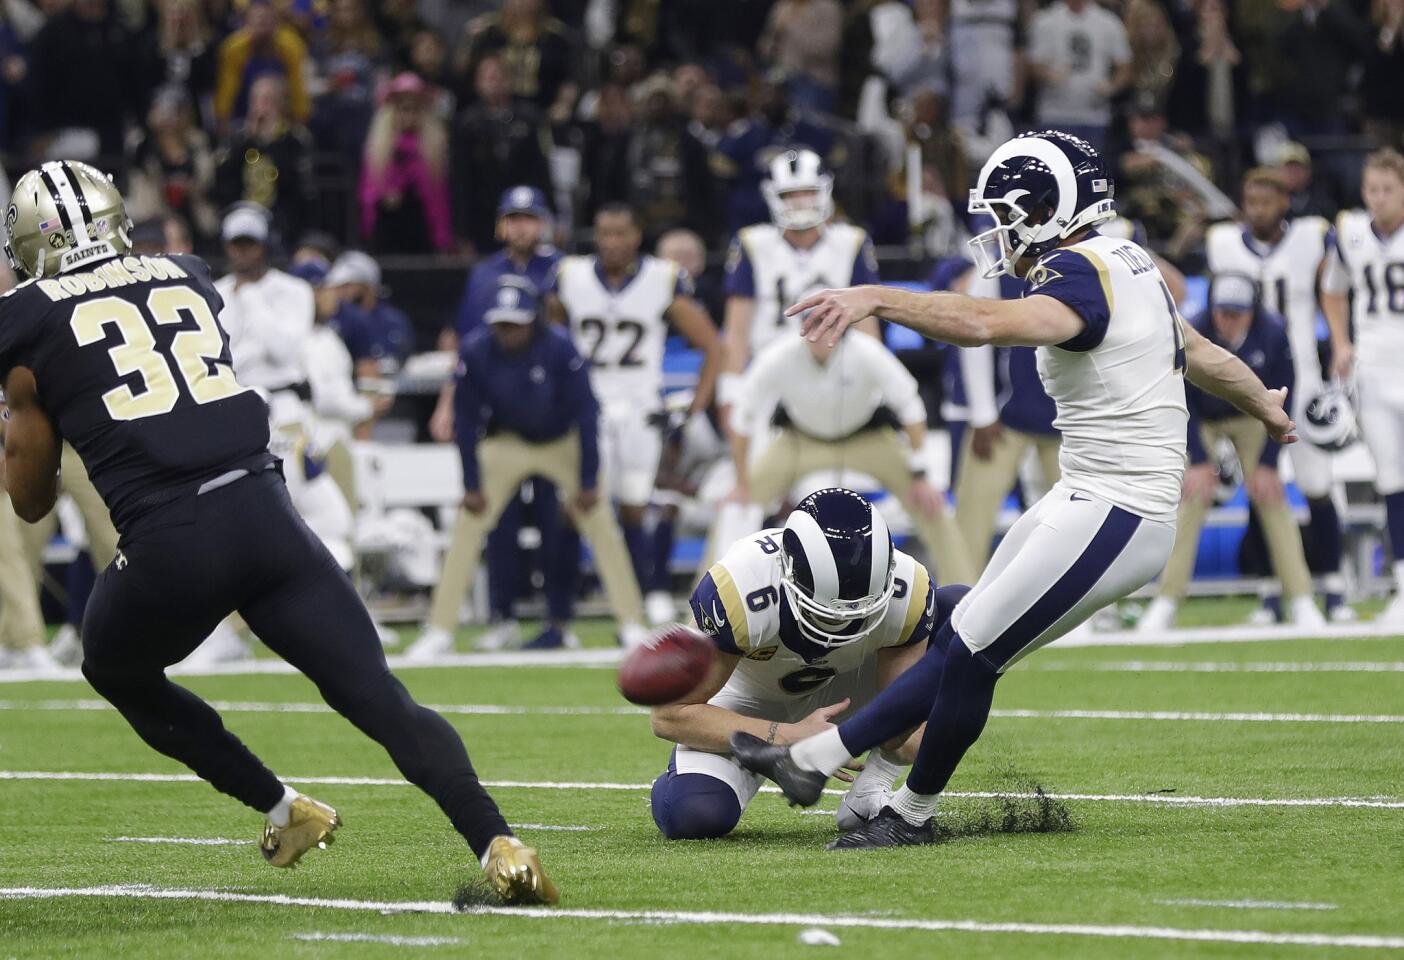 Los Angeles Rams' Greg Zuerlein makes a field goal during the second half of the NFL football NFC championship game against the New Orleans Saints, Sunday, Jan. 20, 2019, in New Orleans.